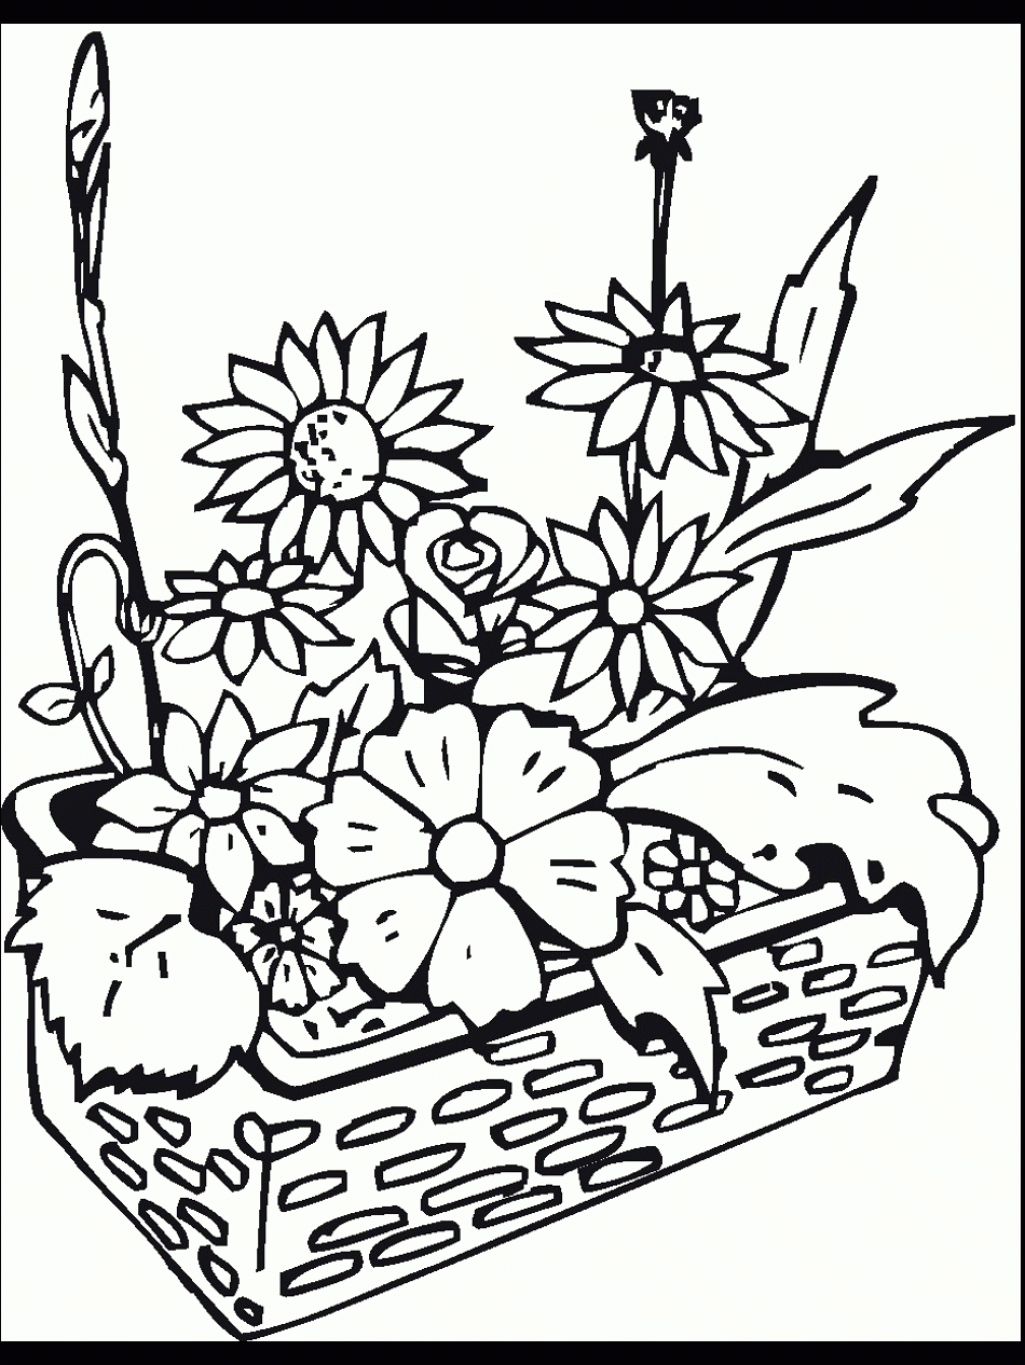 Coloring Pages Of Gardens - Coloring Home